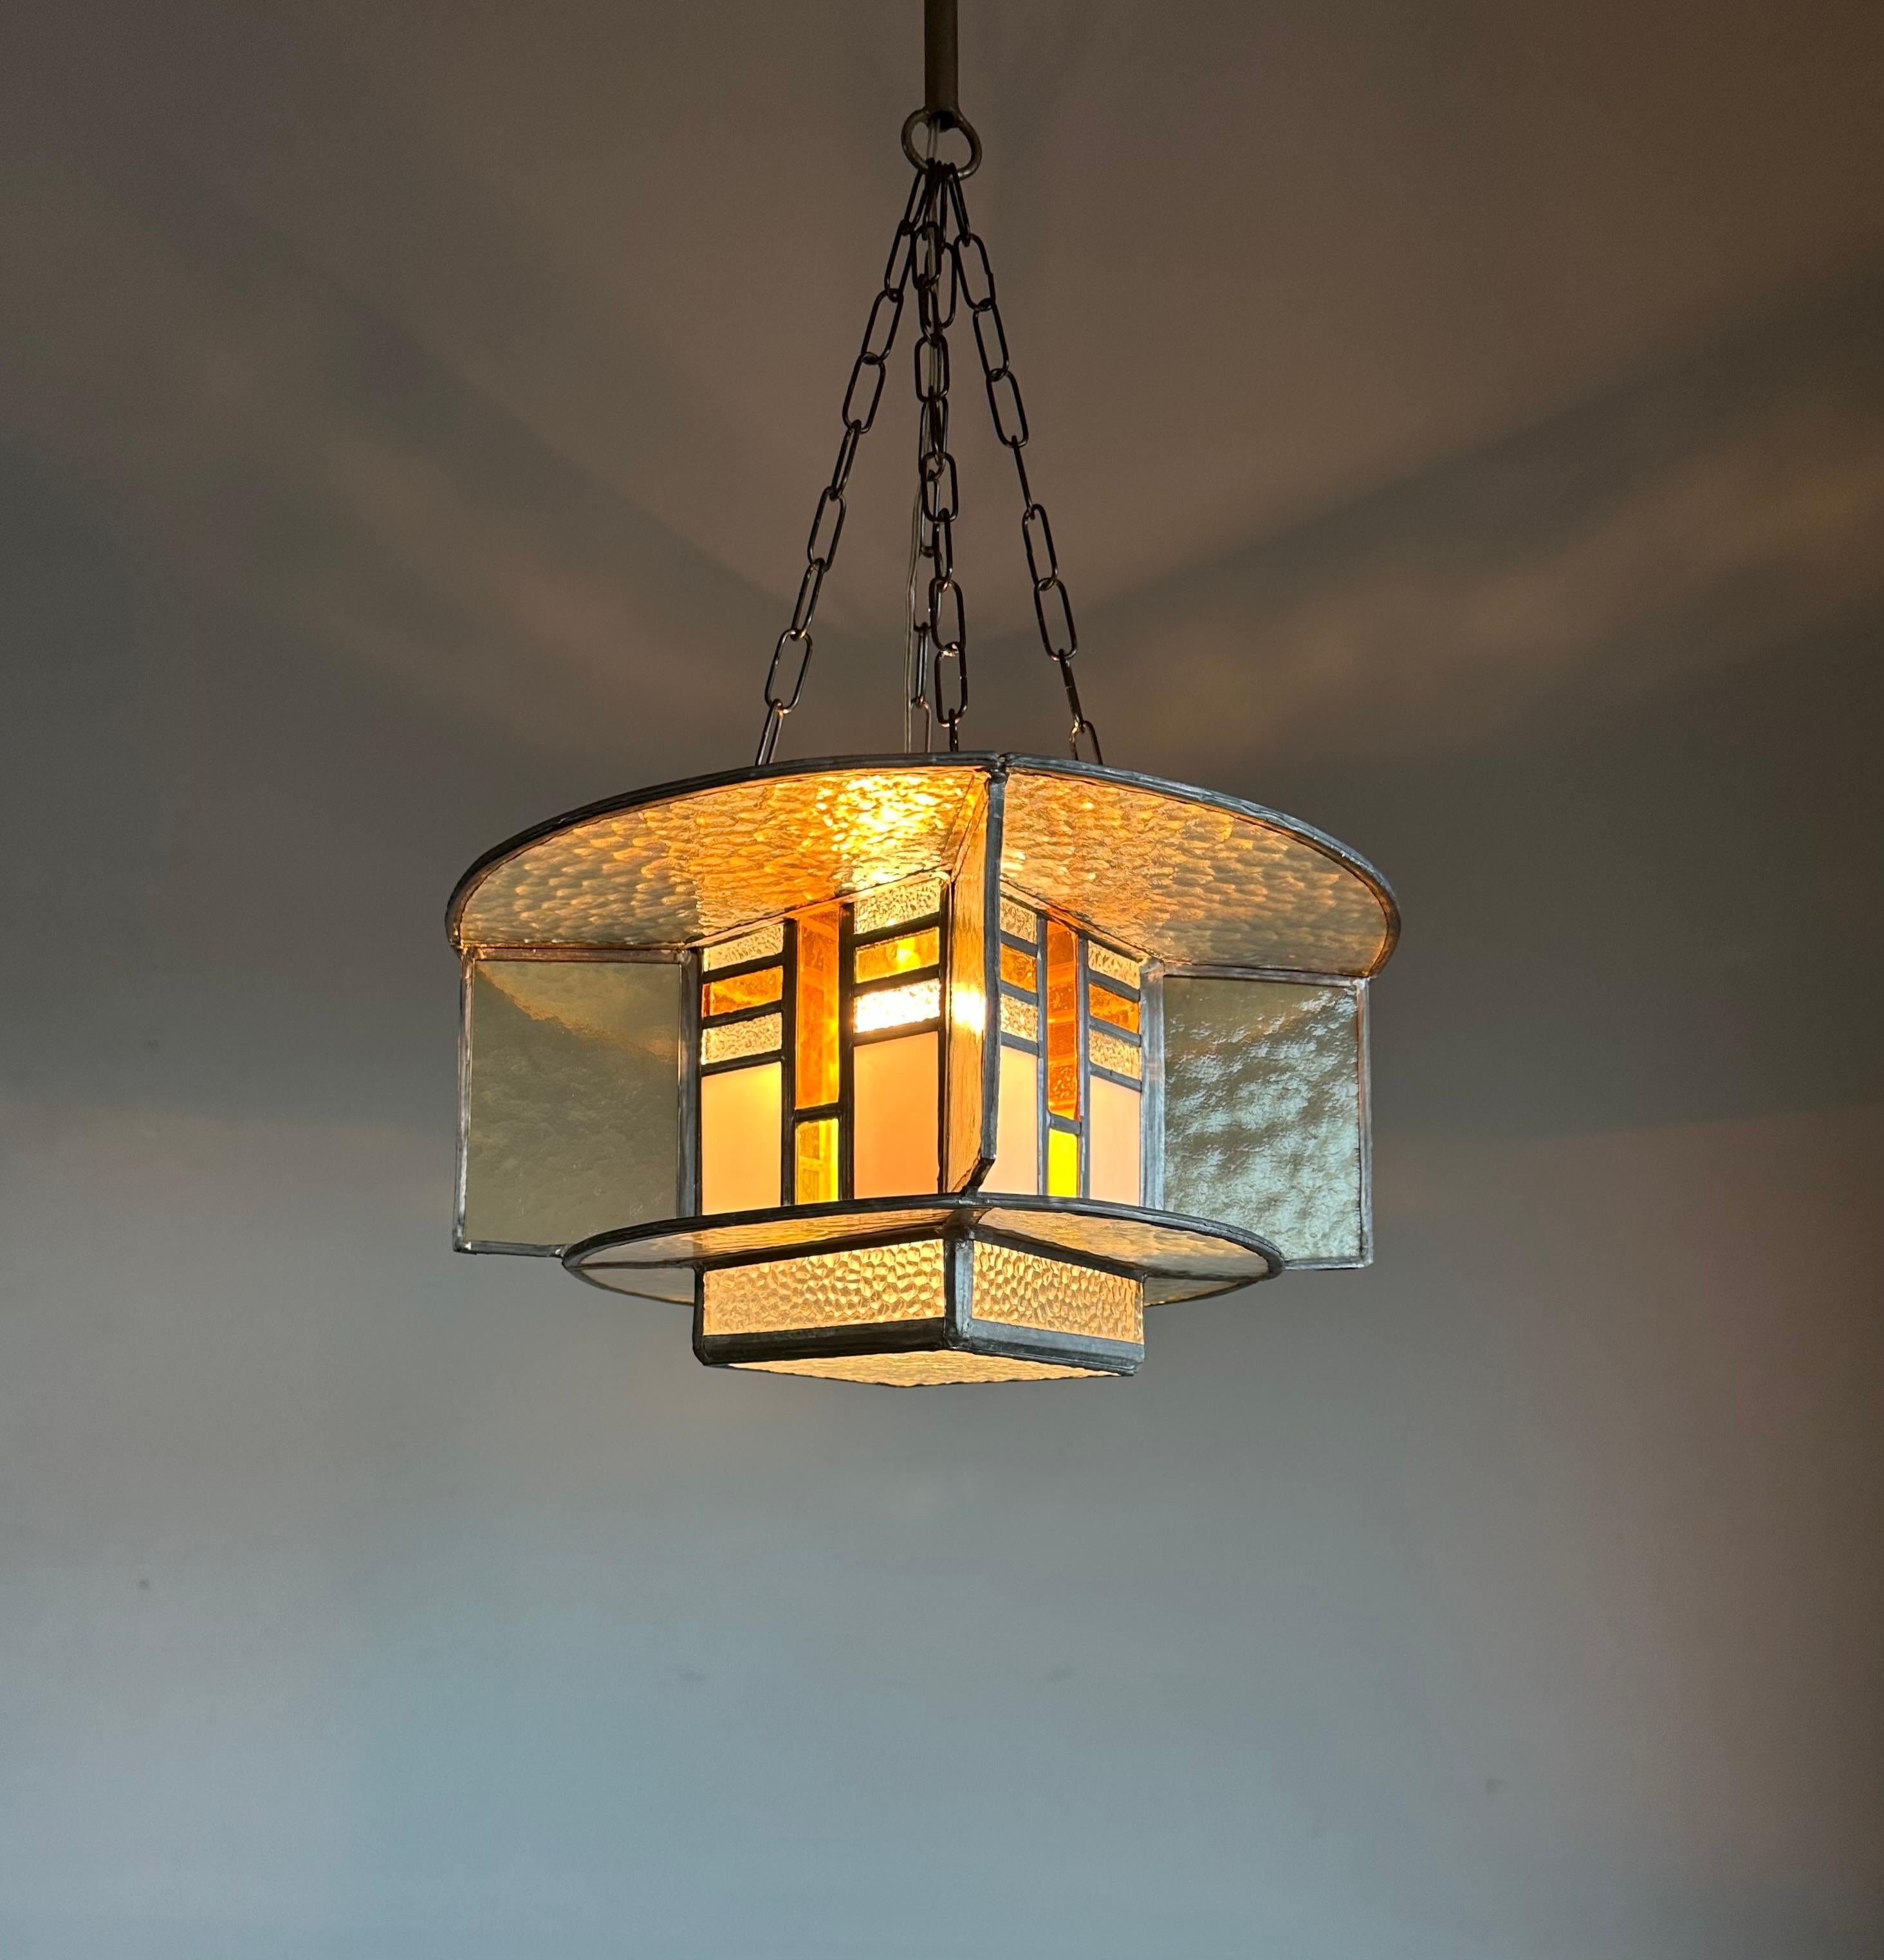 Wonderful looking and very rare design Art Deco stained glass pendant.

Finding antiques that we have never seen before is one of the things that we love most in life. One family has been enjoying this unique light fixture for the past 30 years and